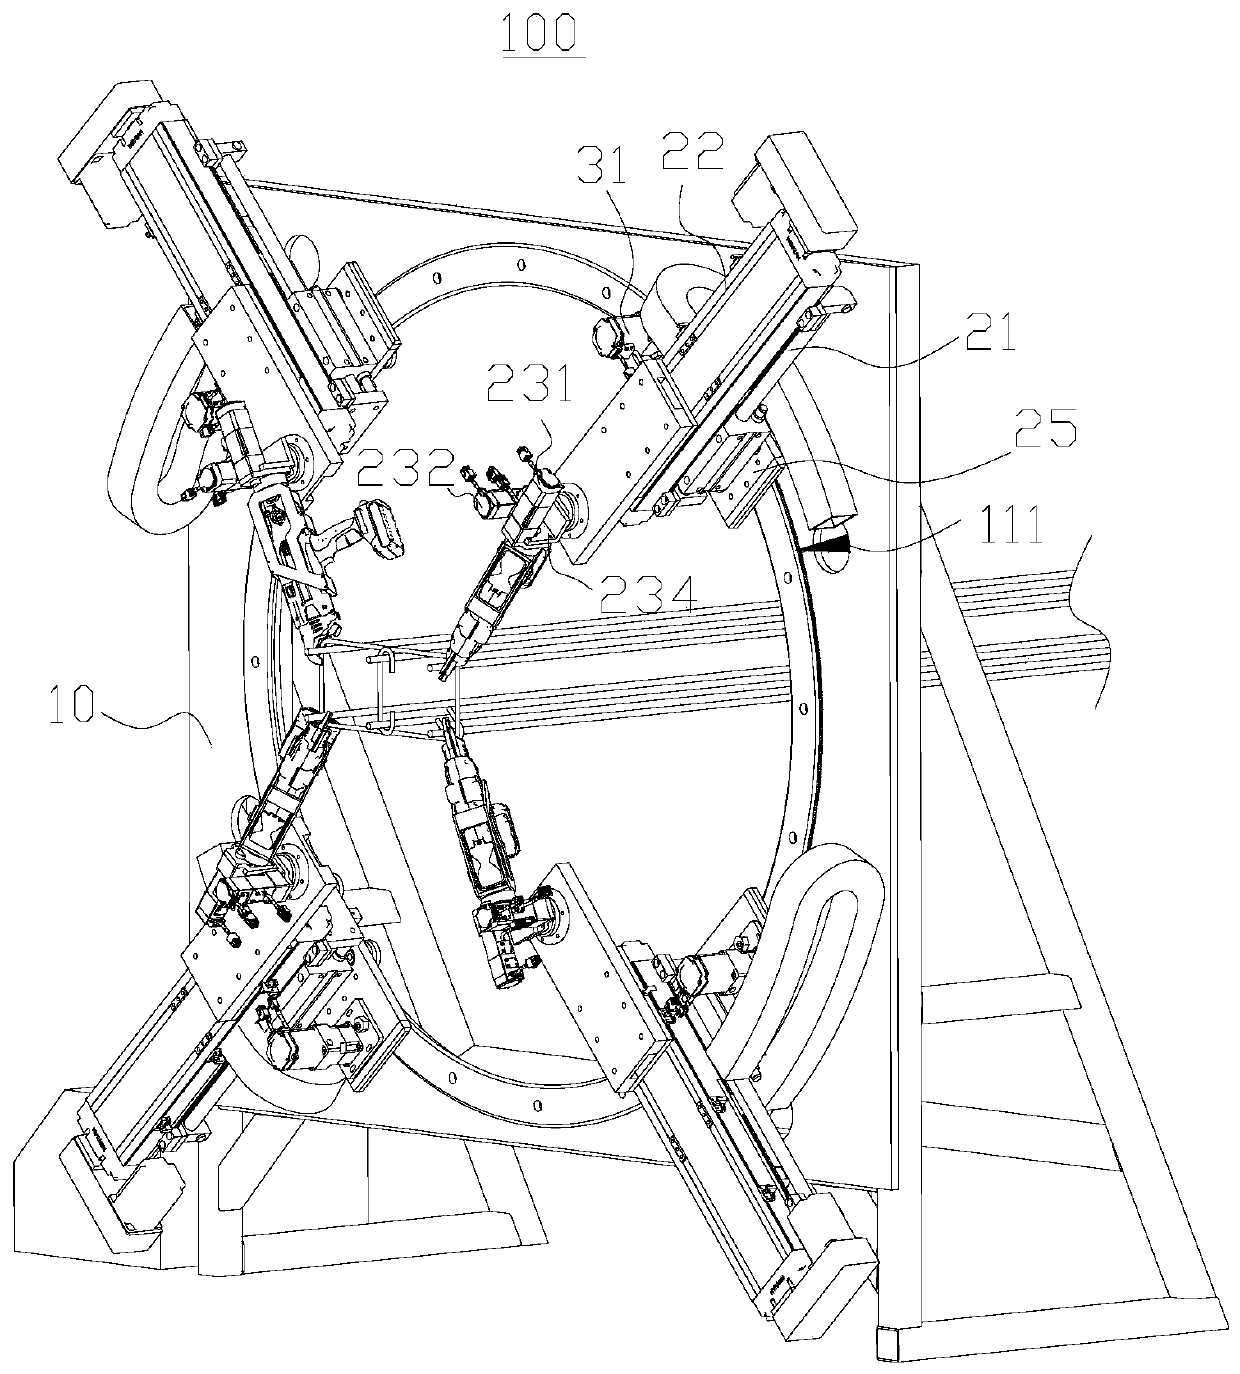 Reinforcement cage binding device